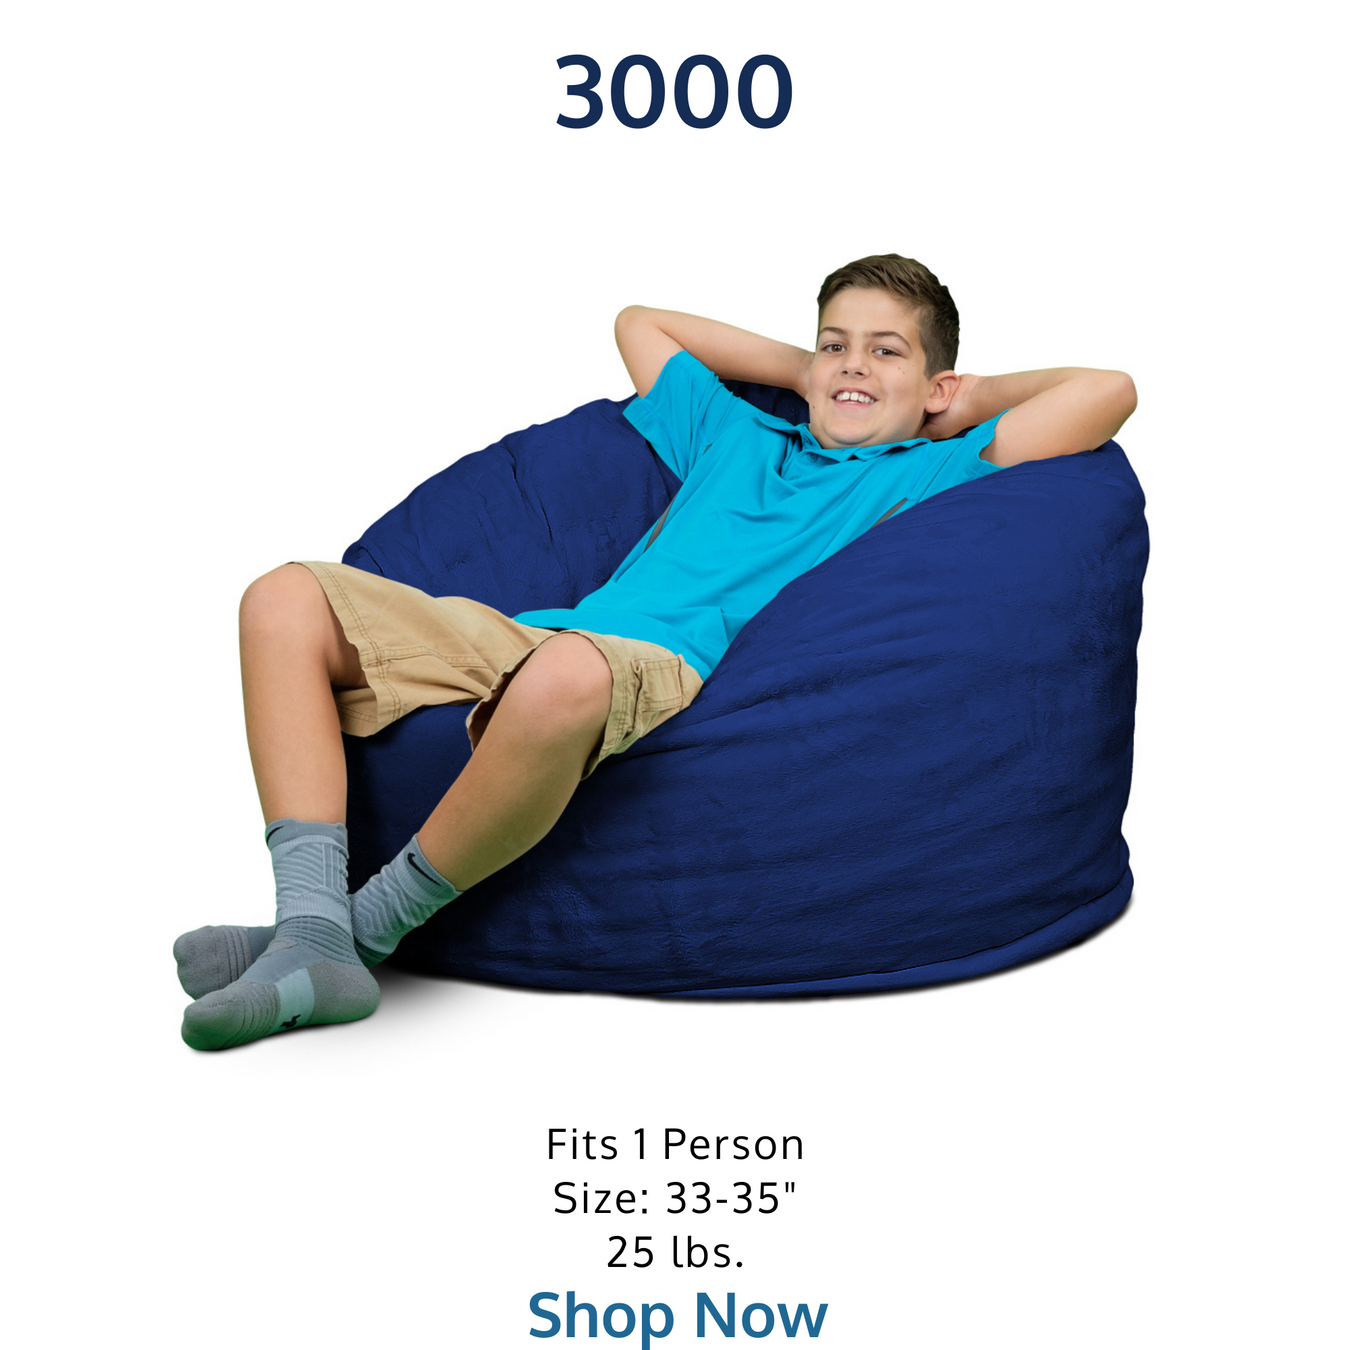 ultimate sack 3000 bean bag chair for Adults and Kids